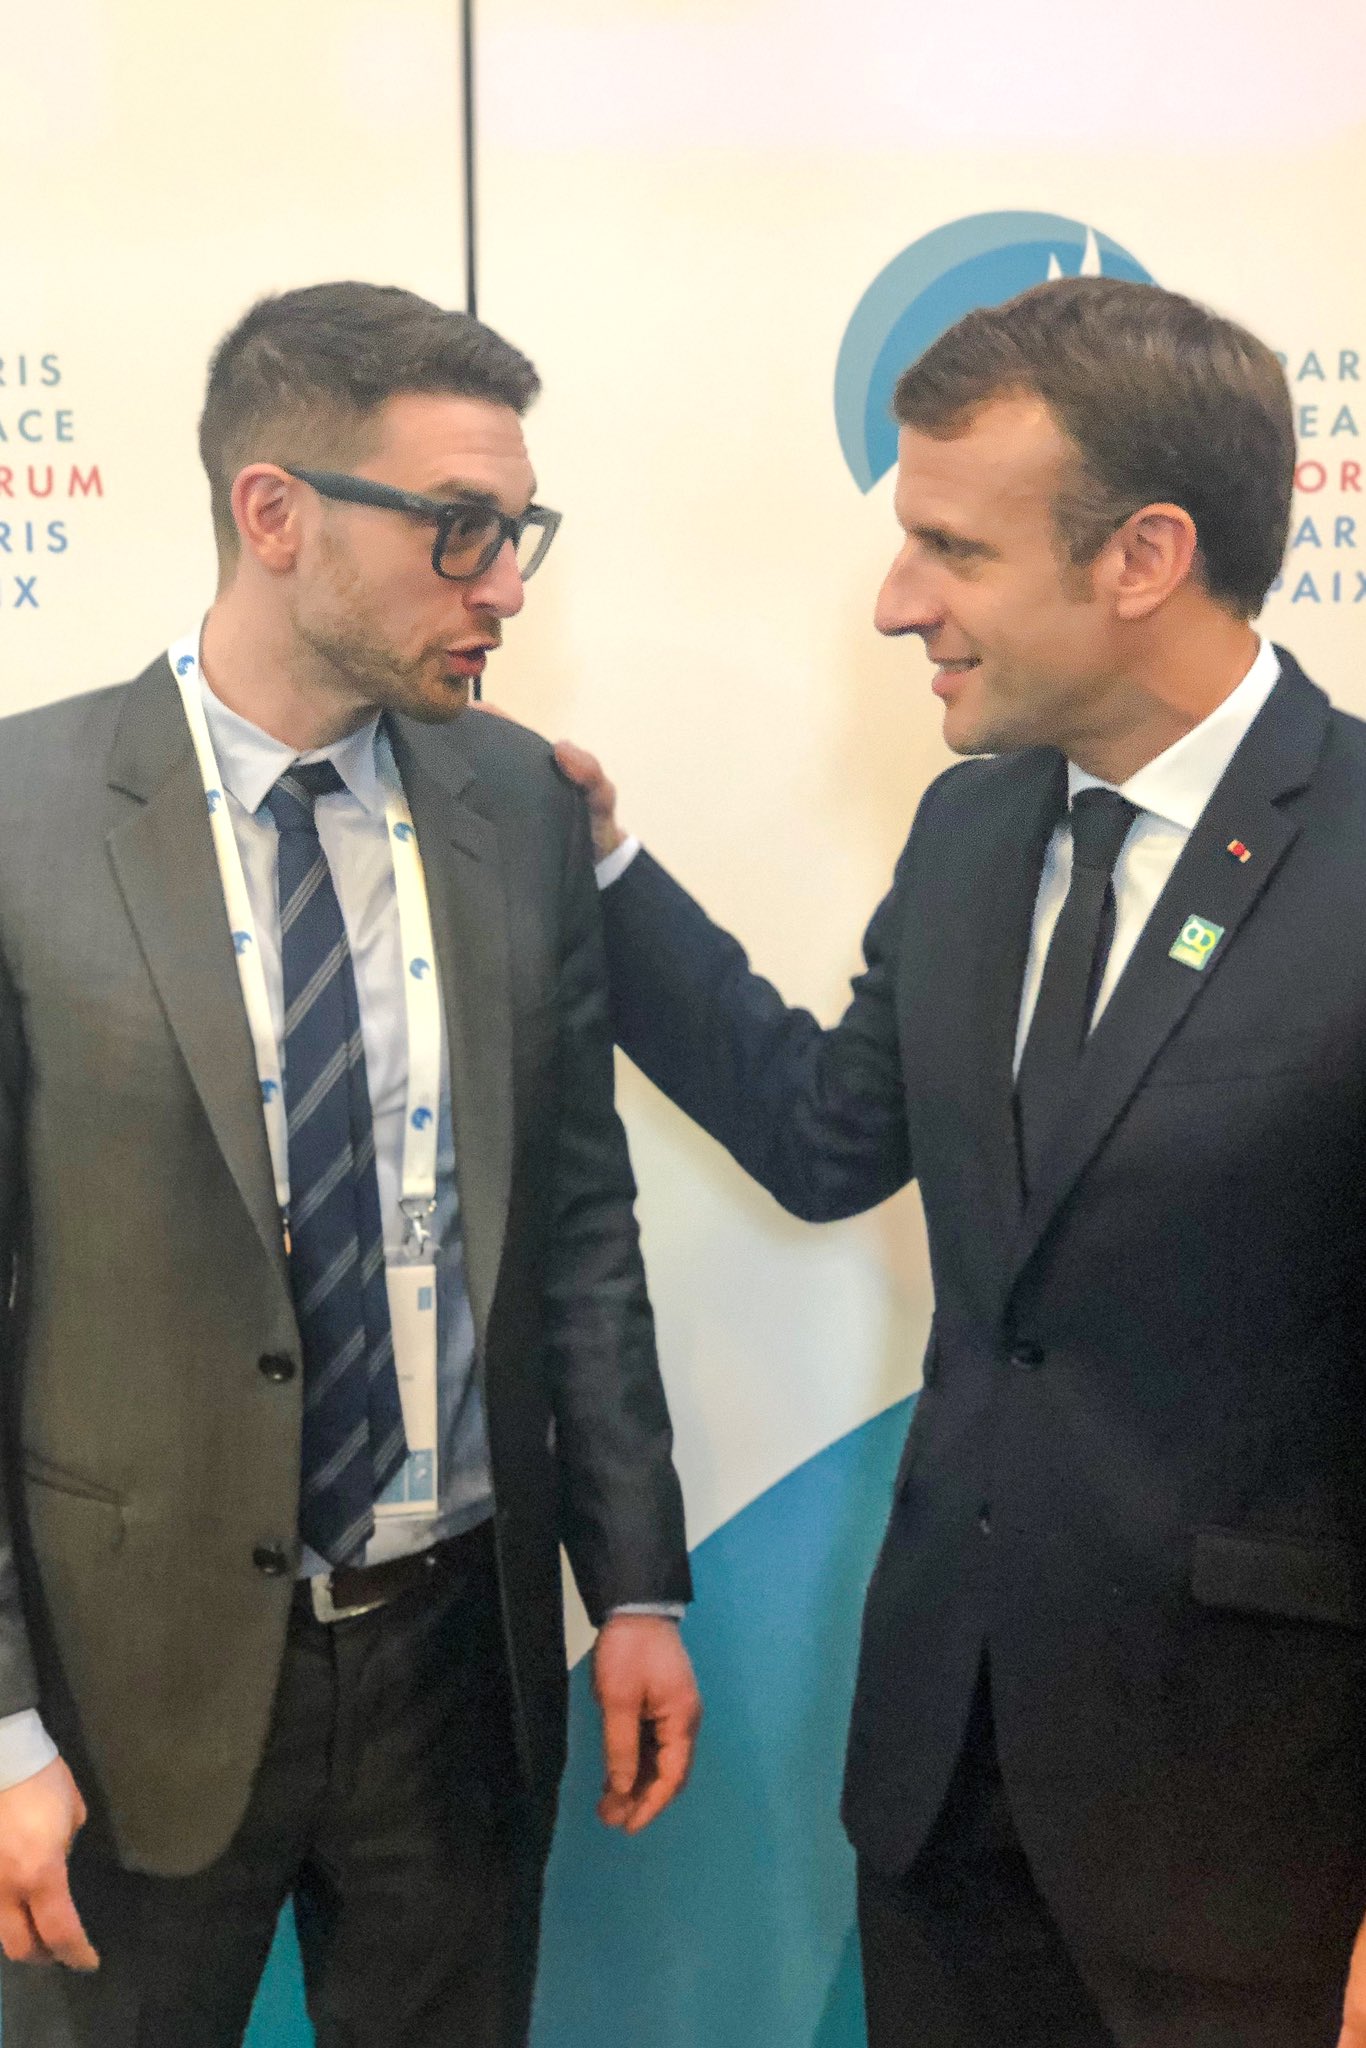 Alexander Soros, PhD on Twitter: "Great catching up with @EmmanuelMacron  during the inauguration of the second annual  @ParisPeaceForum!#ParisPeaceForum2019 #standforpeace  https://t.co/ro2Ms4Pyxd" / Twitter